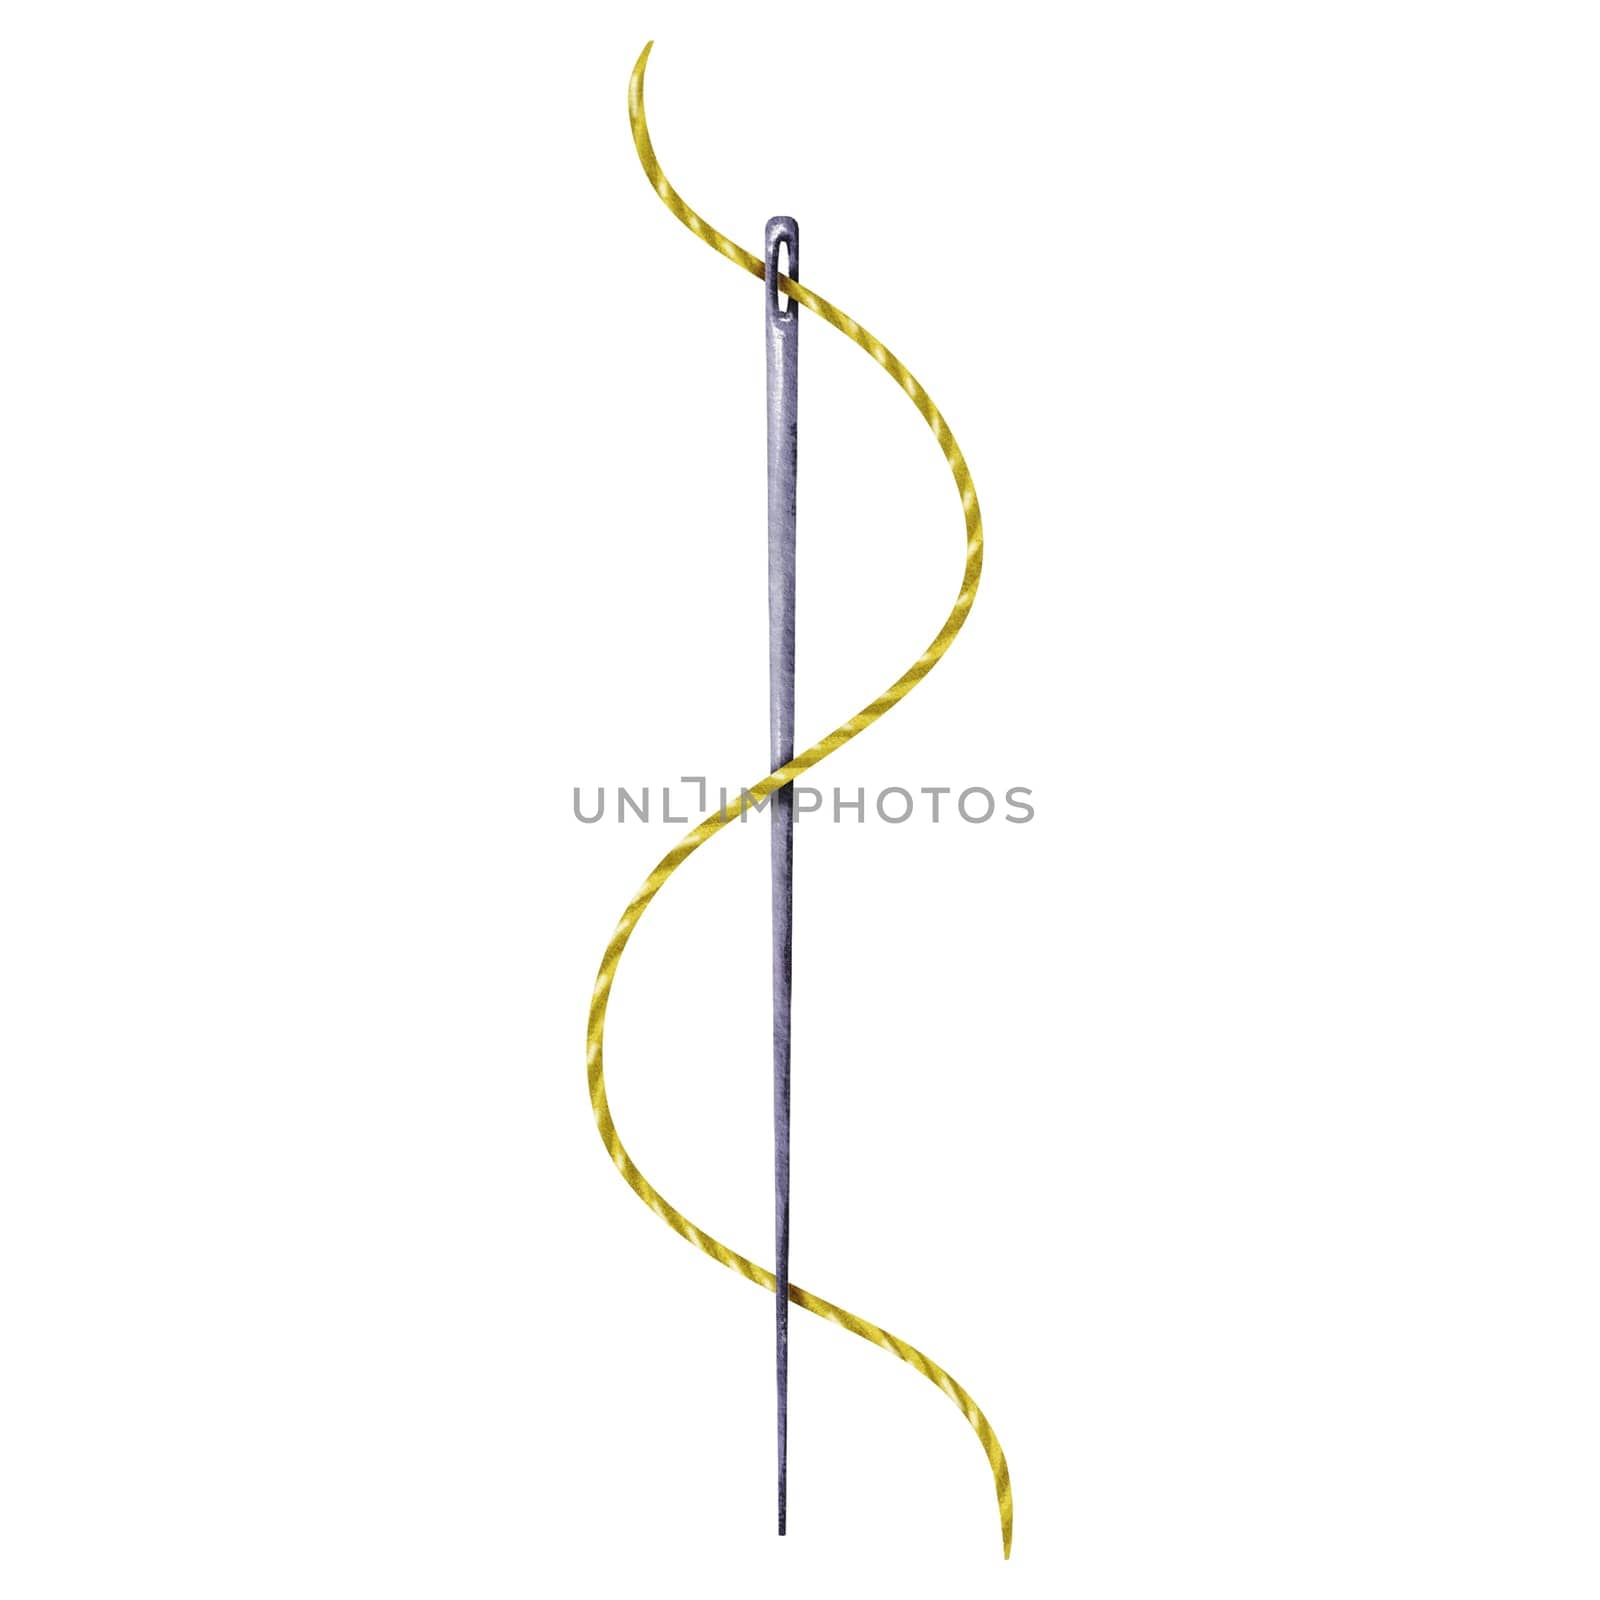 A metal sewing needle with a green thread. Elegant motion. Isolated illustration. Rendered in watercolors. for logos related to sewing, crafting enthusiasts, needlework shops, and DIY-themed designs.